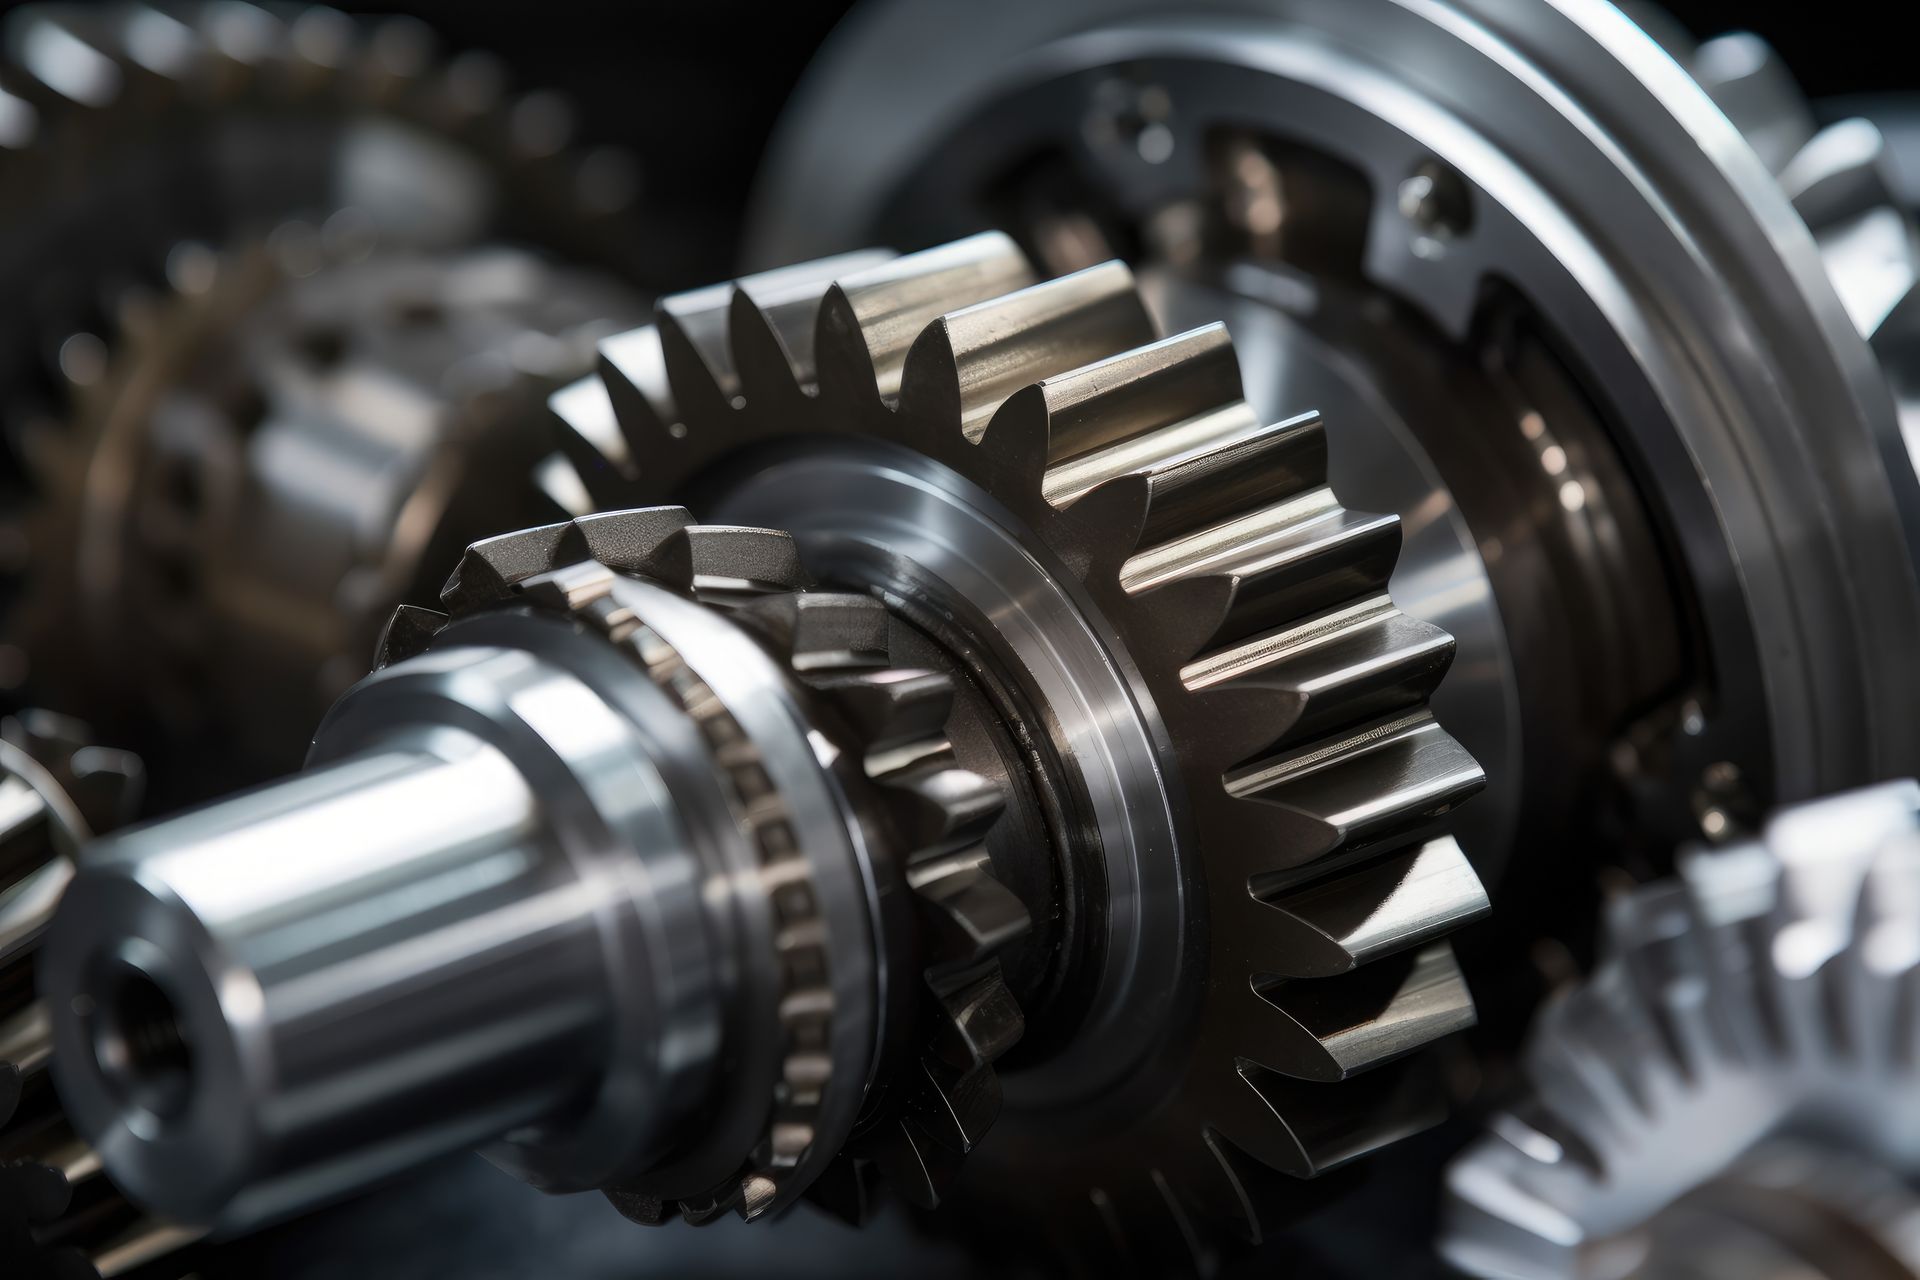 Differential Service at ﻿808 Automotive Inc.﻿ in ﻿Hubbard, OR﻿